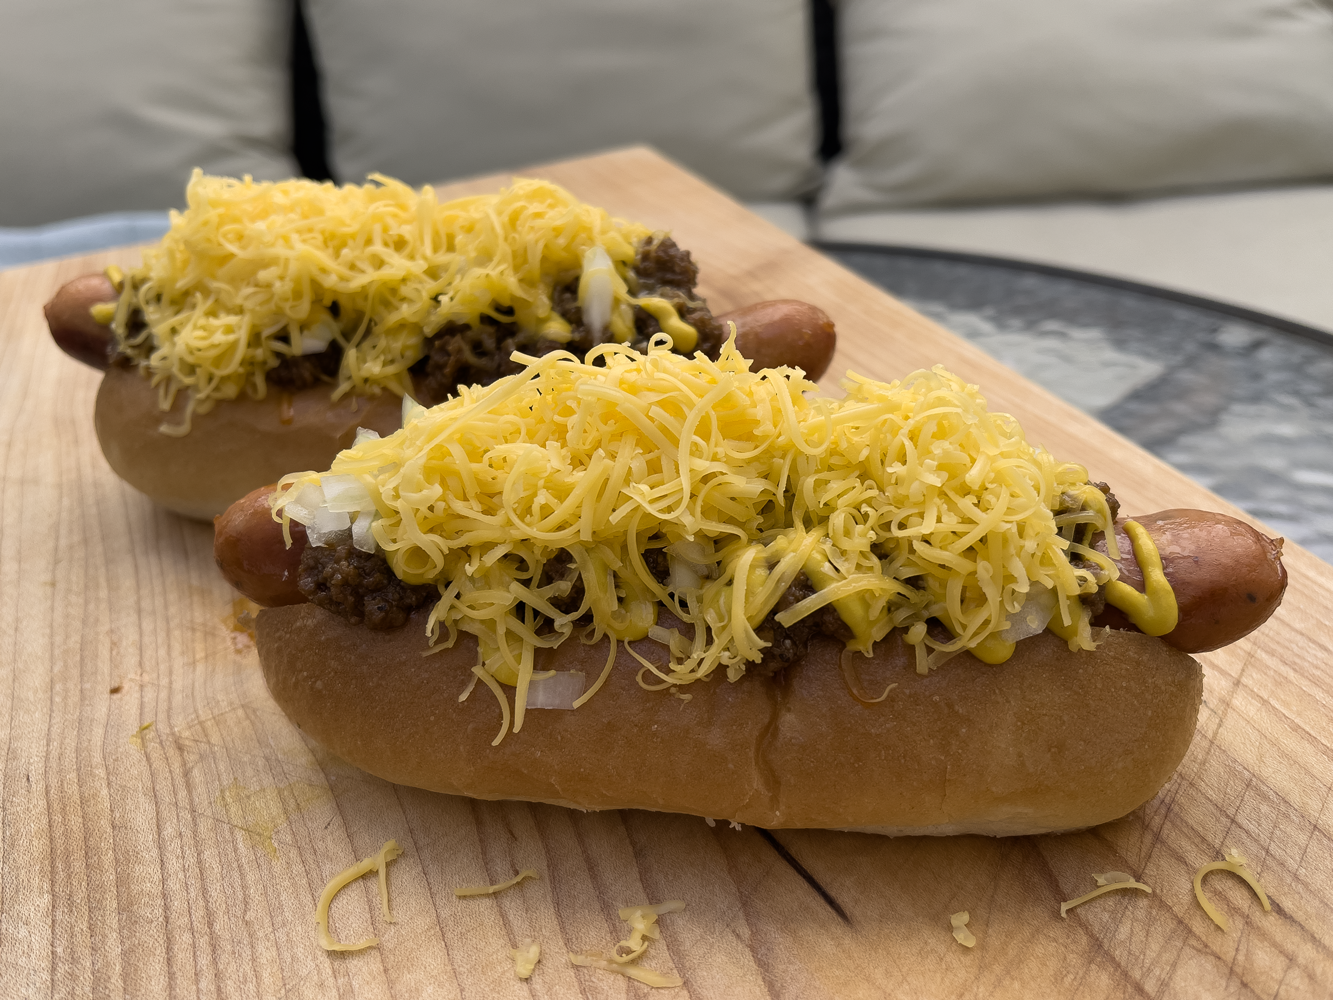 two chili dogs, Cincinnati style, topped with chili, onions, and cheese, sitting on a wooden cutting board